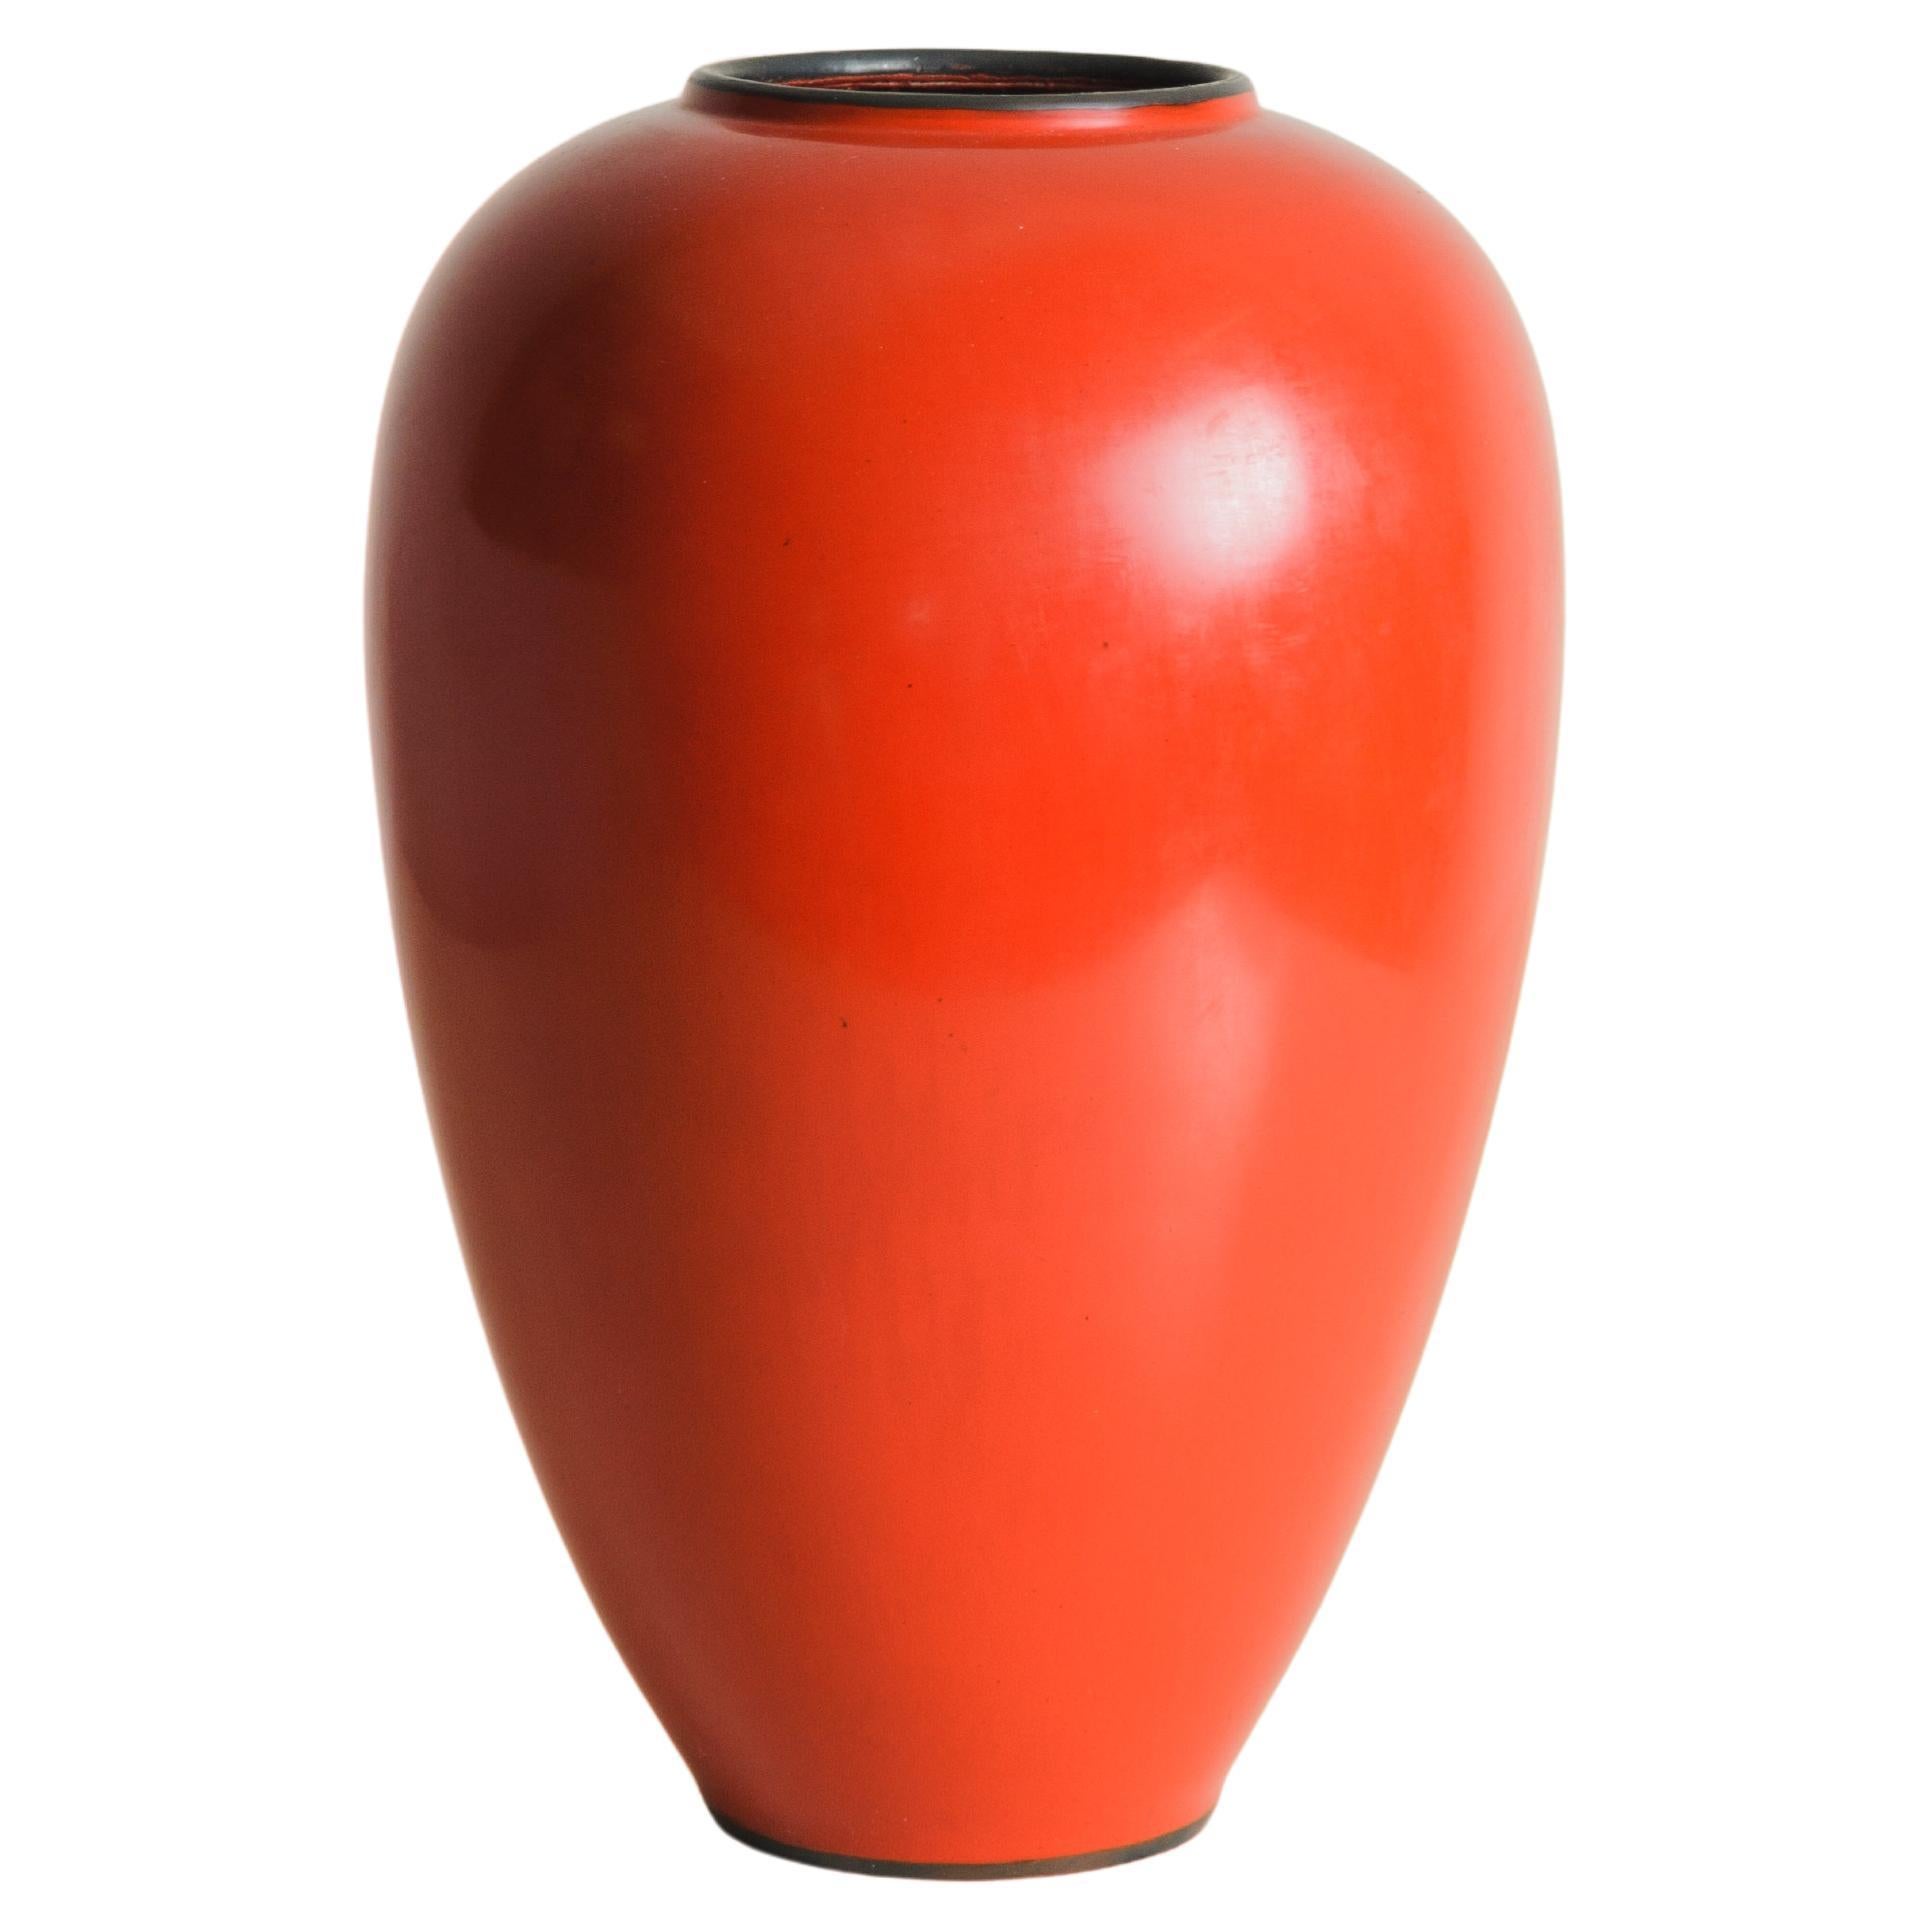 Contemporary Baluster Vase w/ Copper Rim in Red Lacquer by Robert Kuo